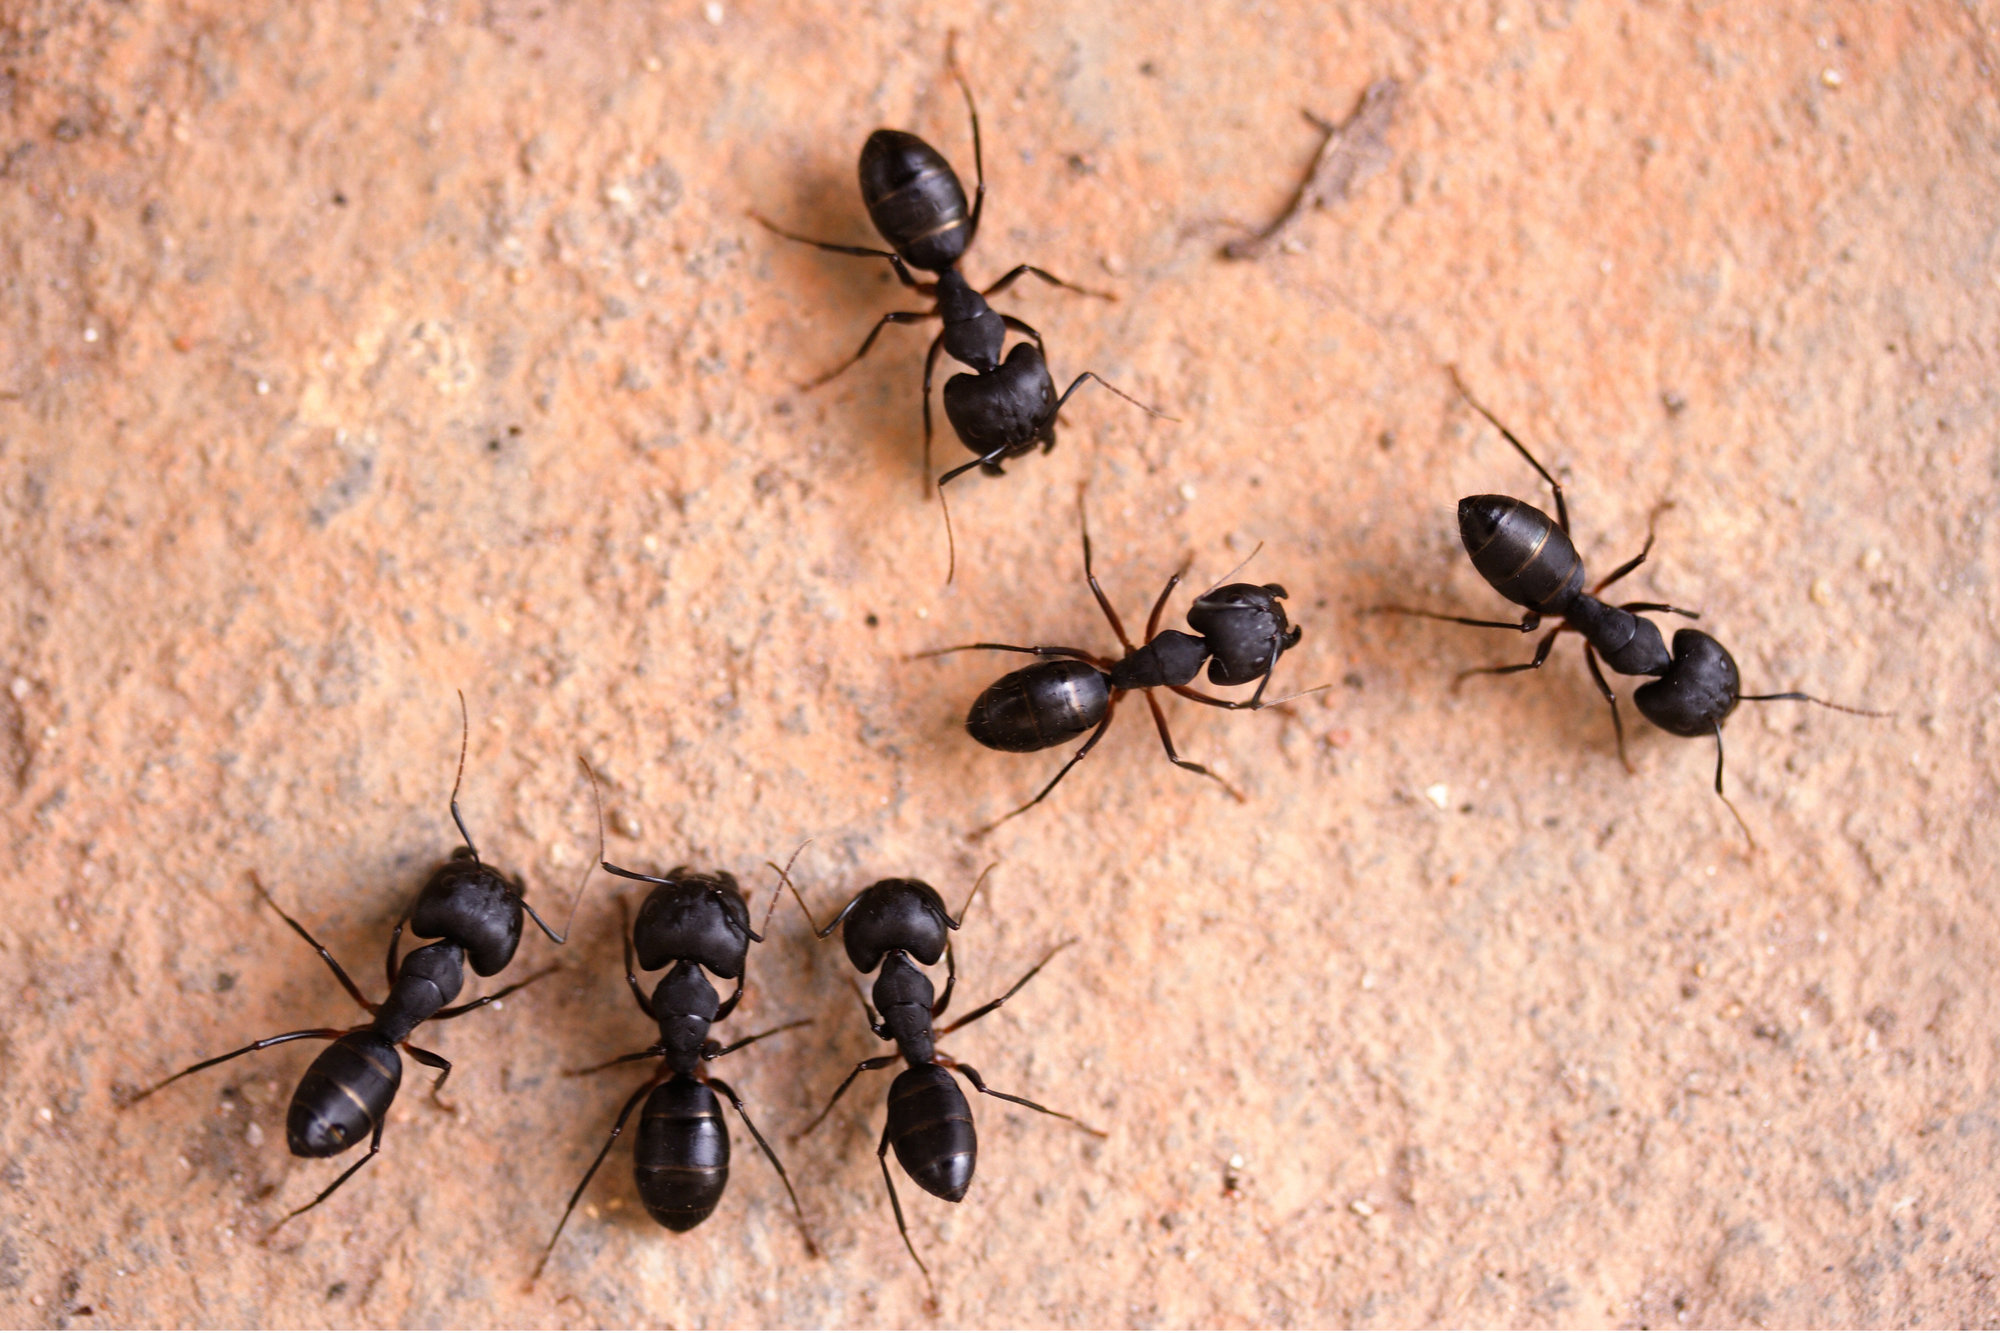 group of carpenter ants